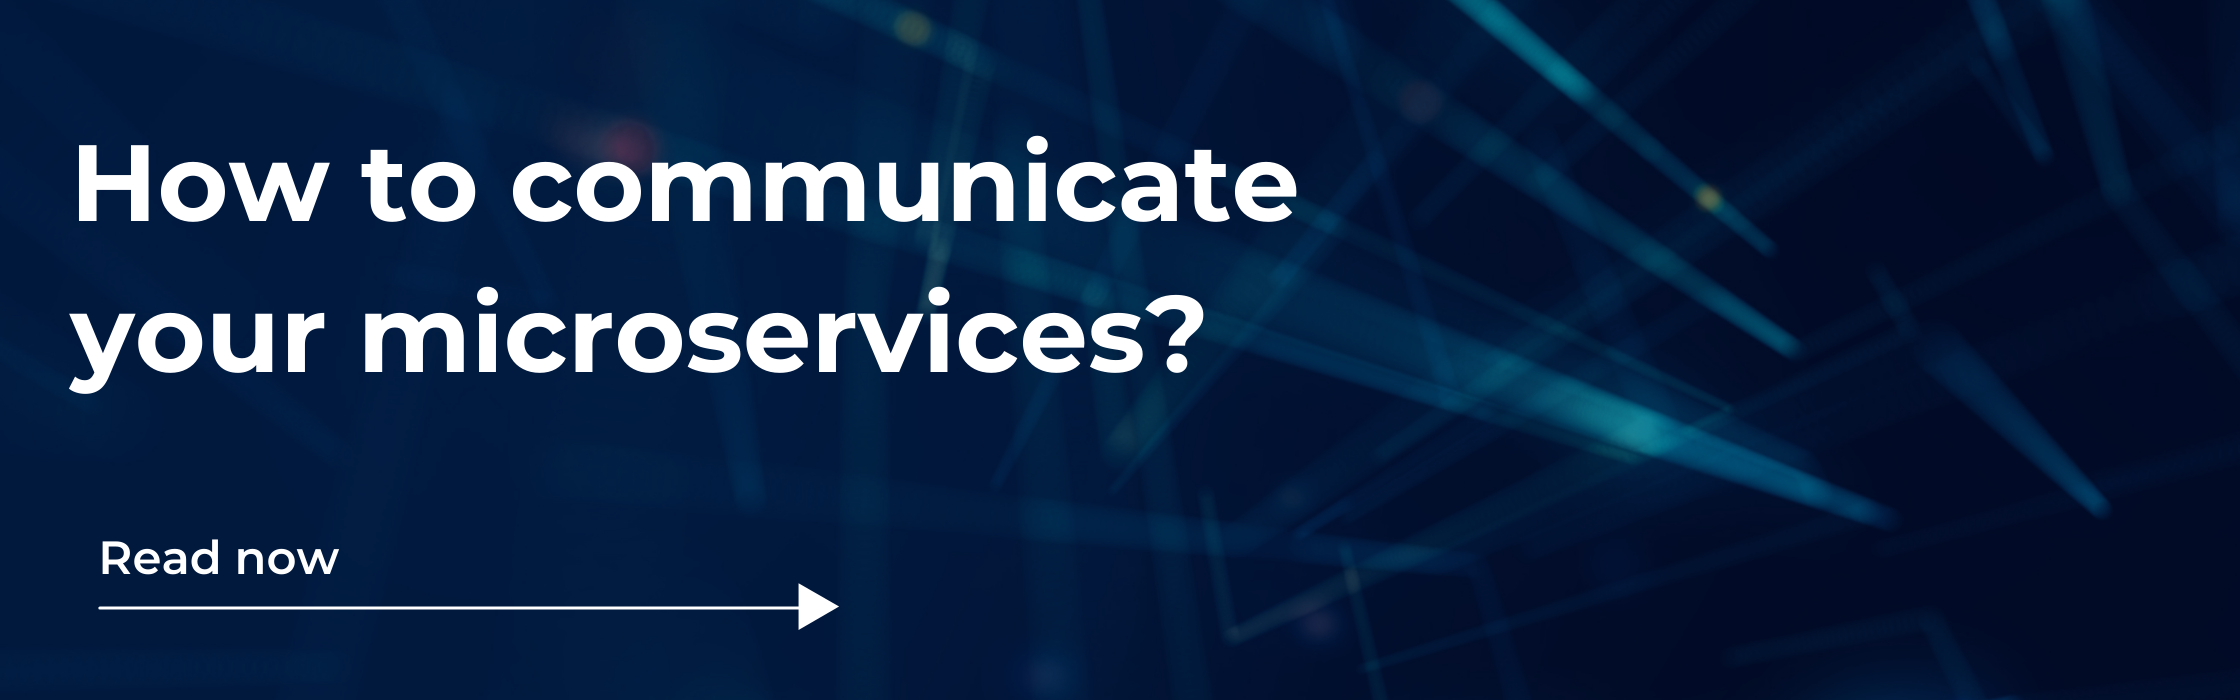 CTA-how-to-communicate-microservices